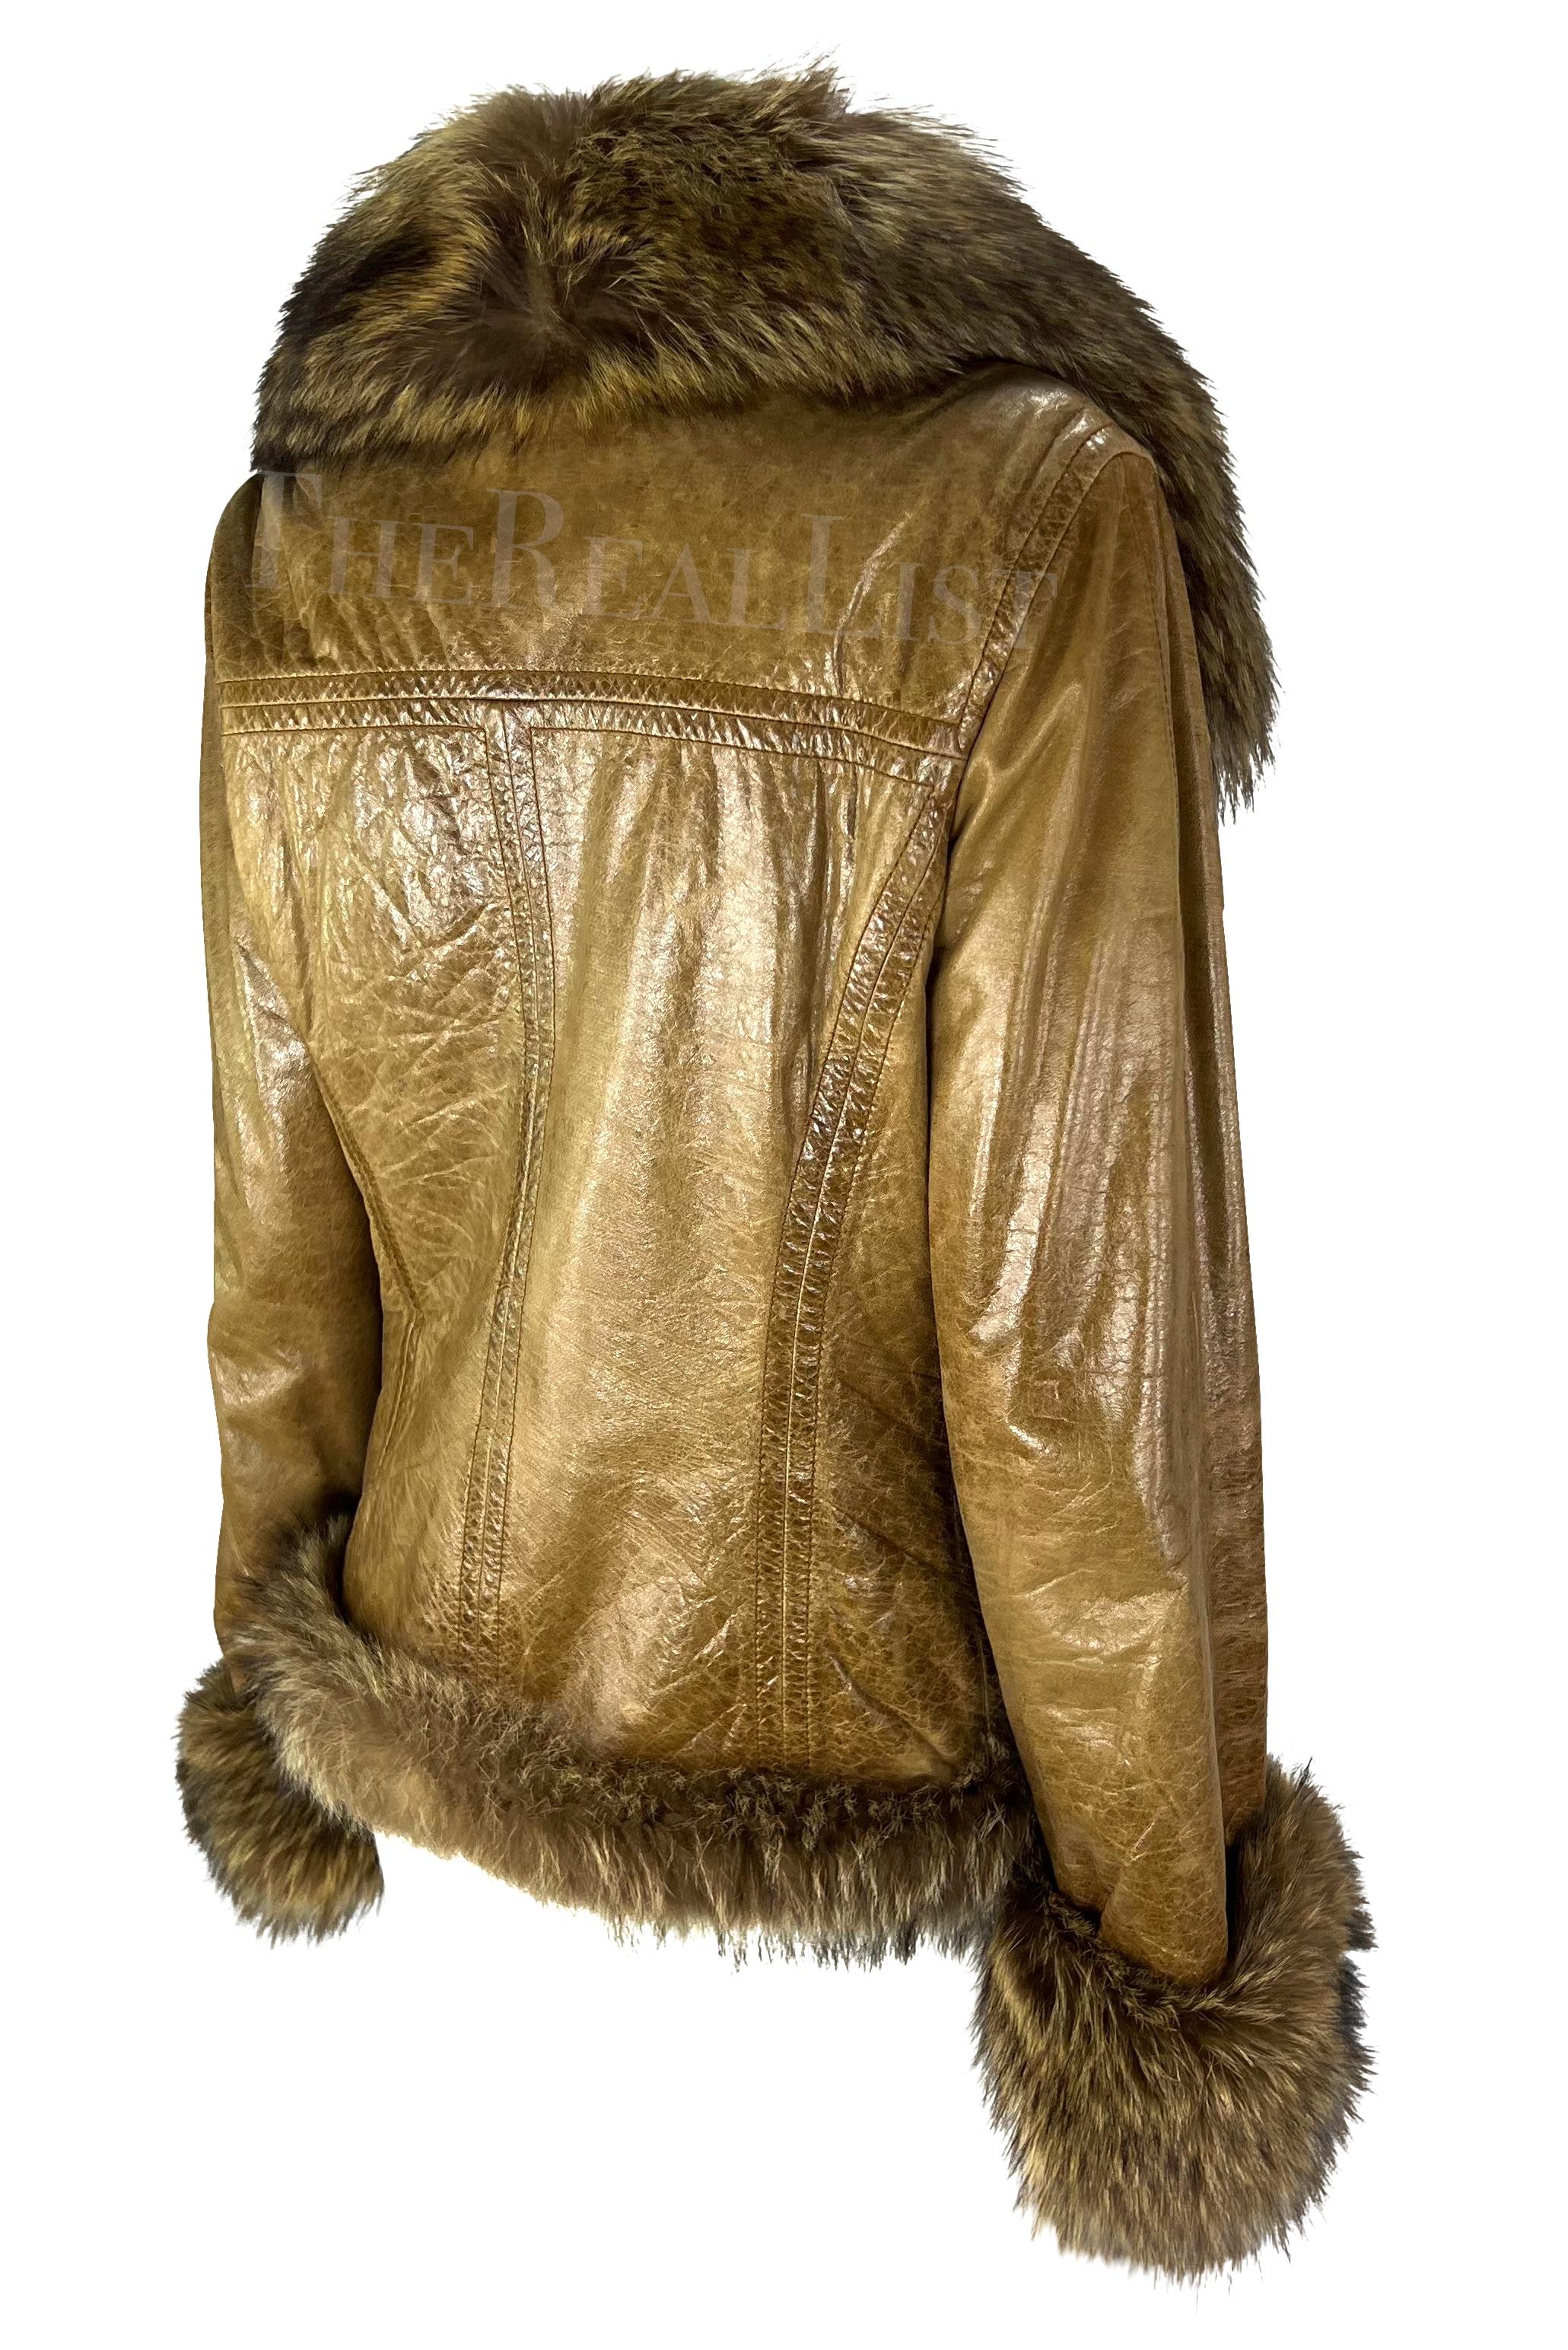 2000s Dolce & Gabbana Logo Buckle Brown Distressed Patent Leather Fur Coat In Excellent Condition For Sale In West Hollywood, CA